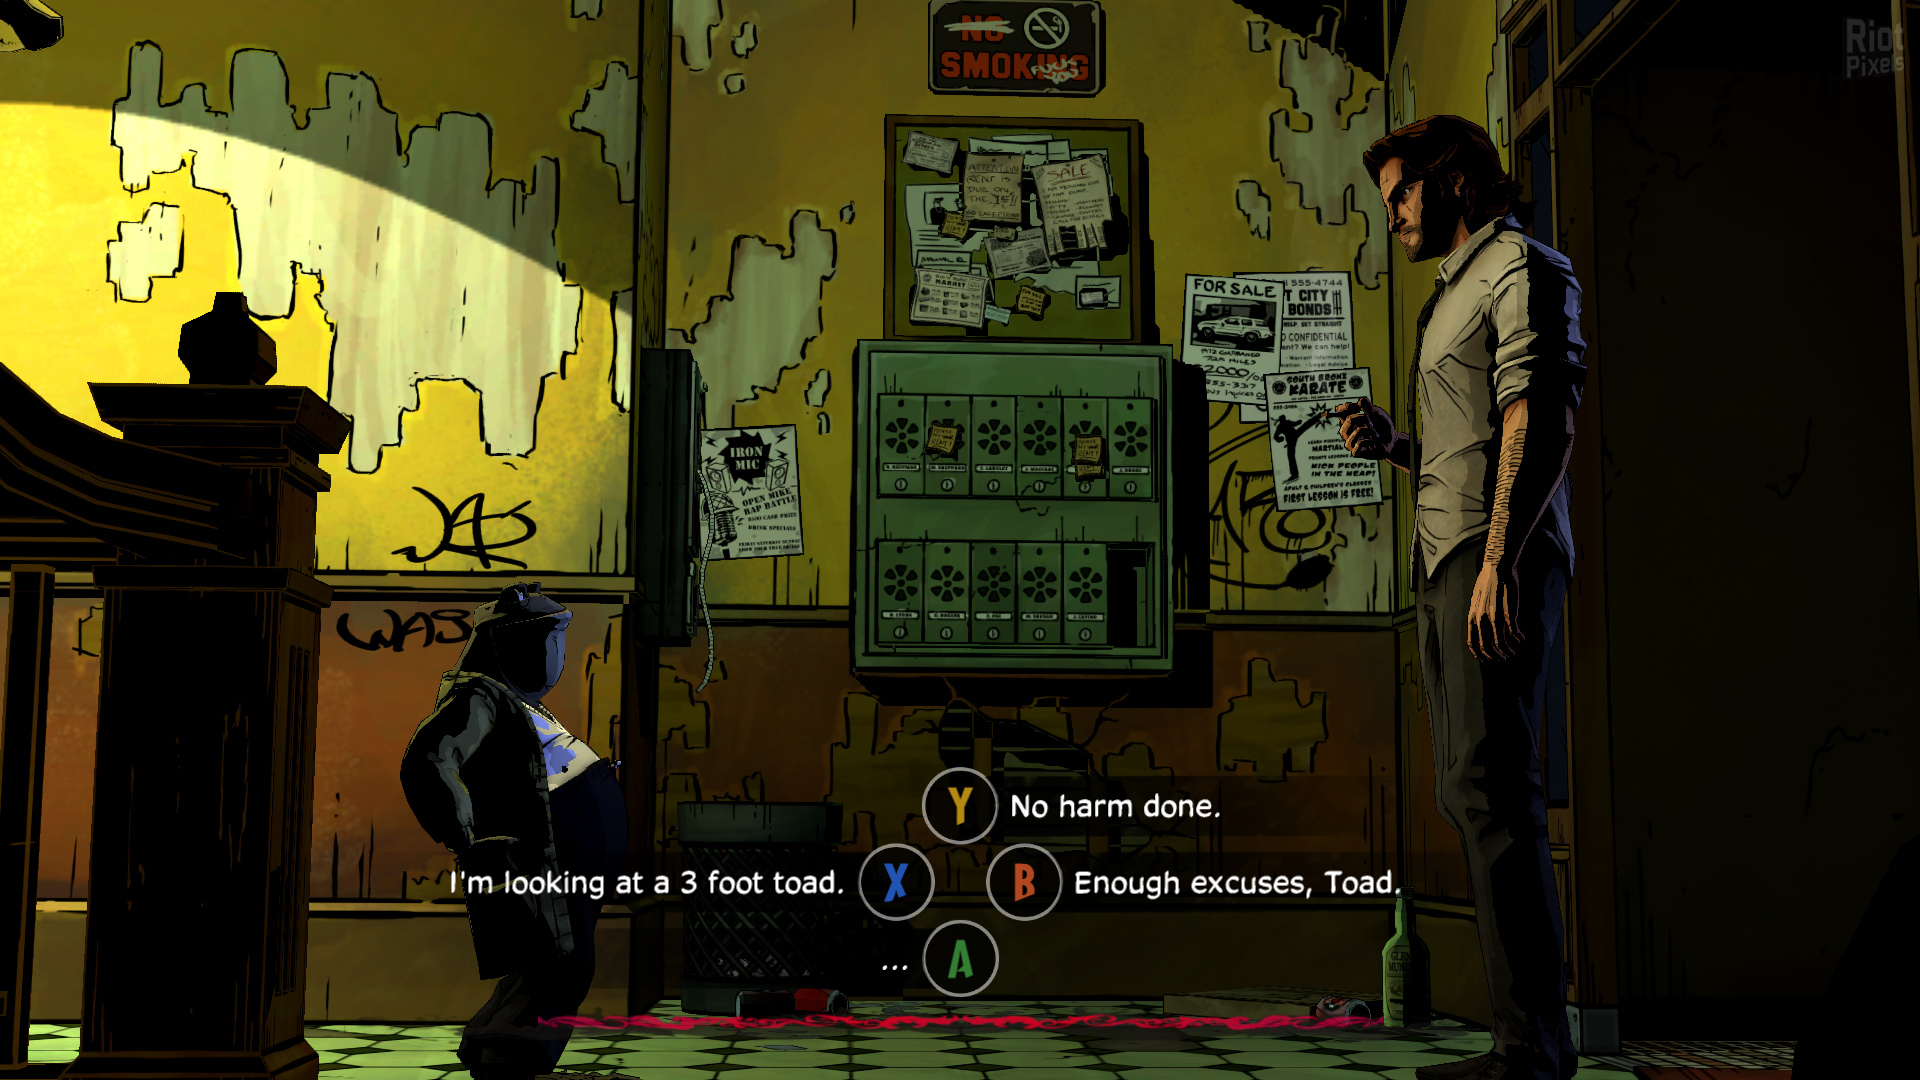 the wolf among us episode 1 free